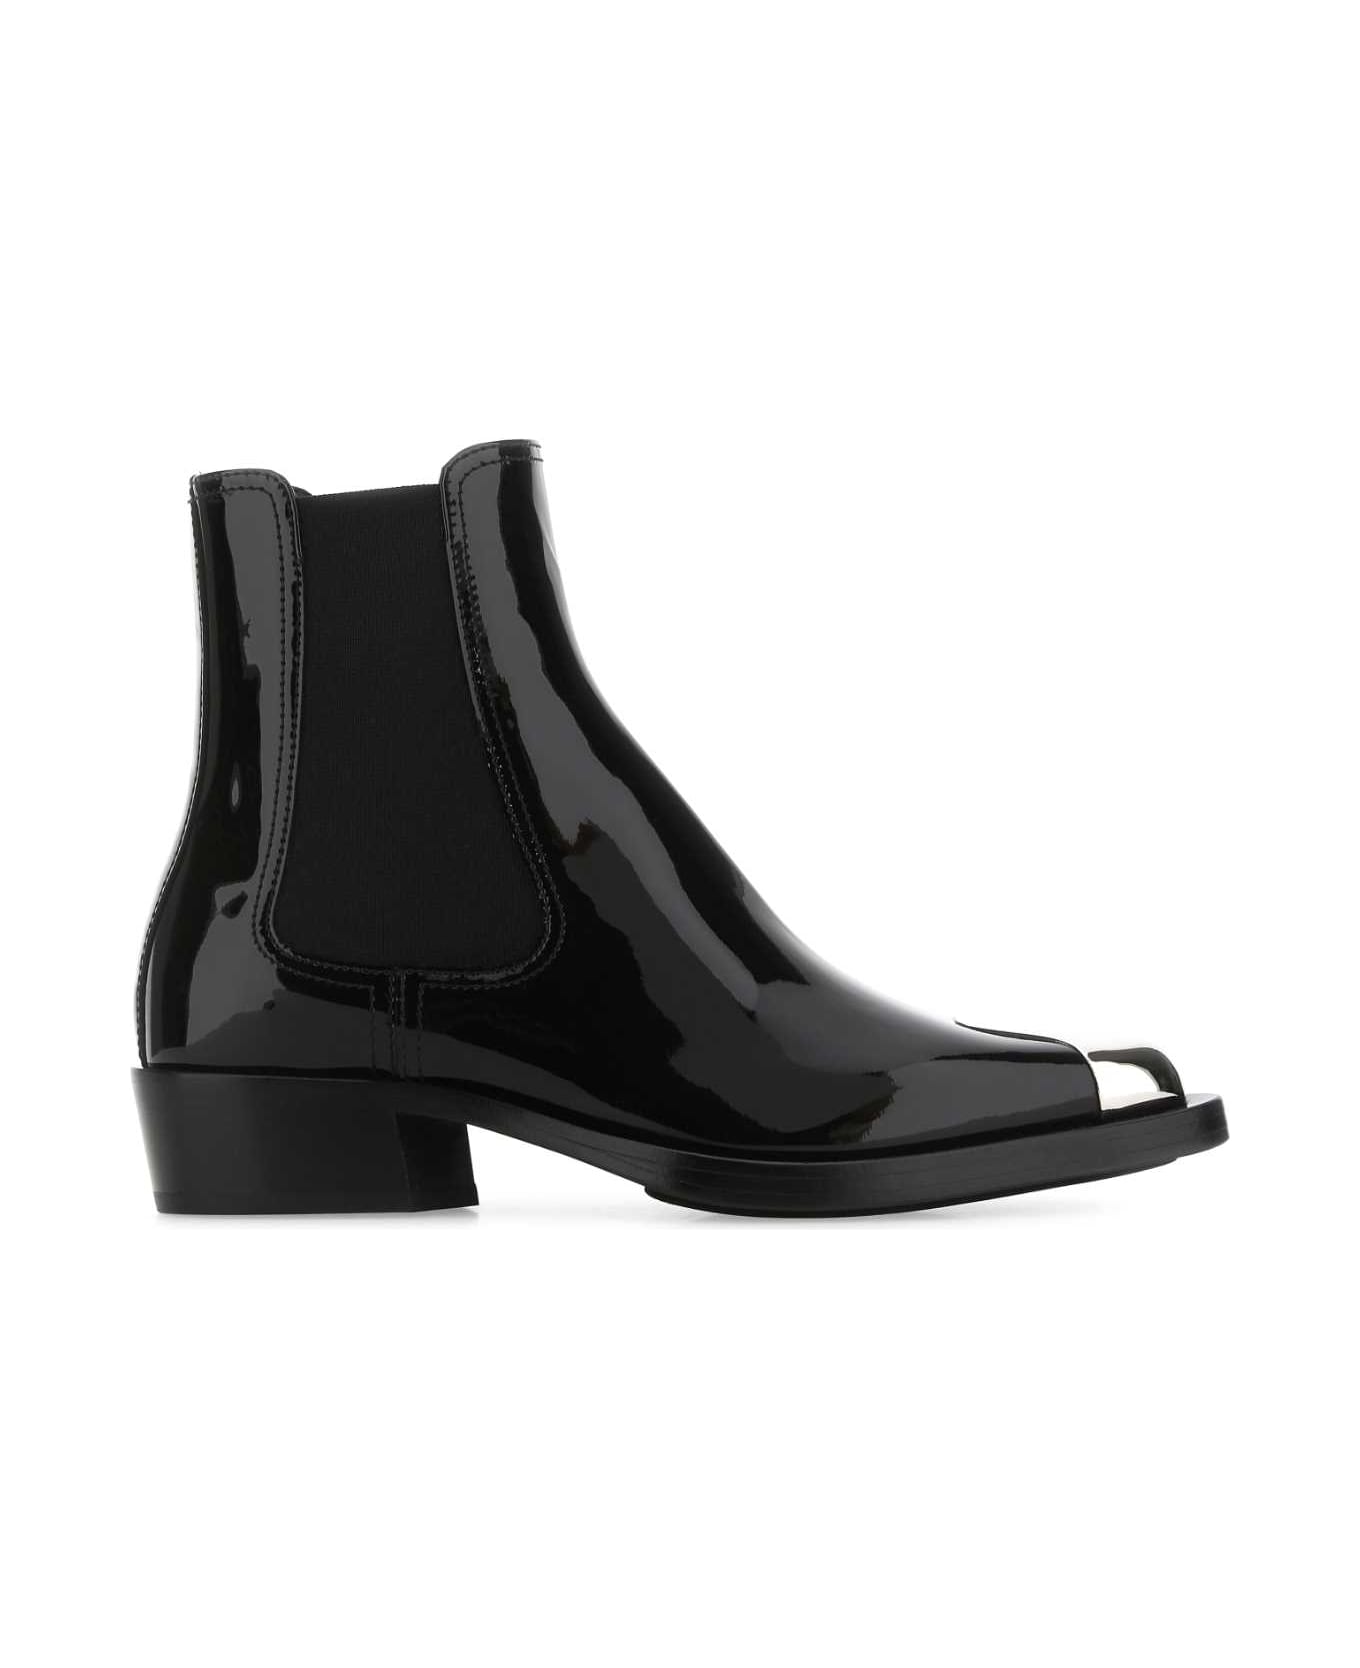 Alexander McQueen Black Leather Ankle Boots - 1081 ブーツ